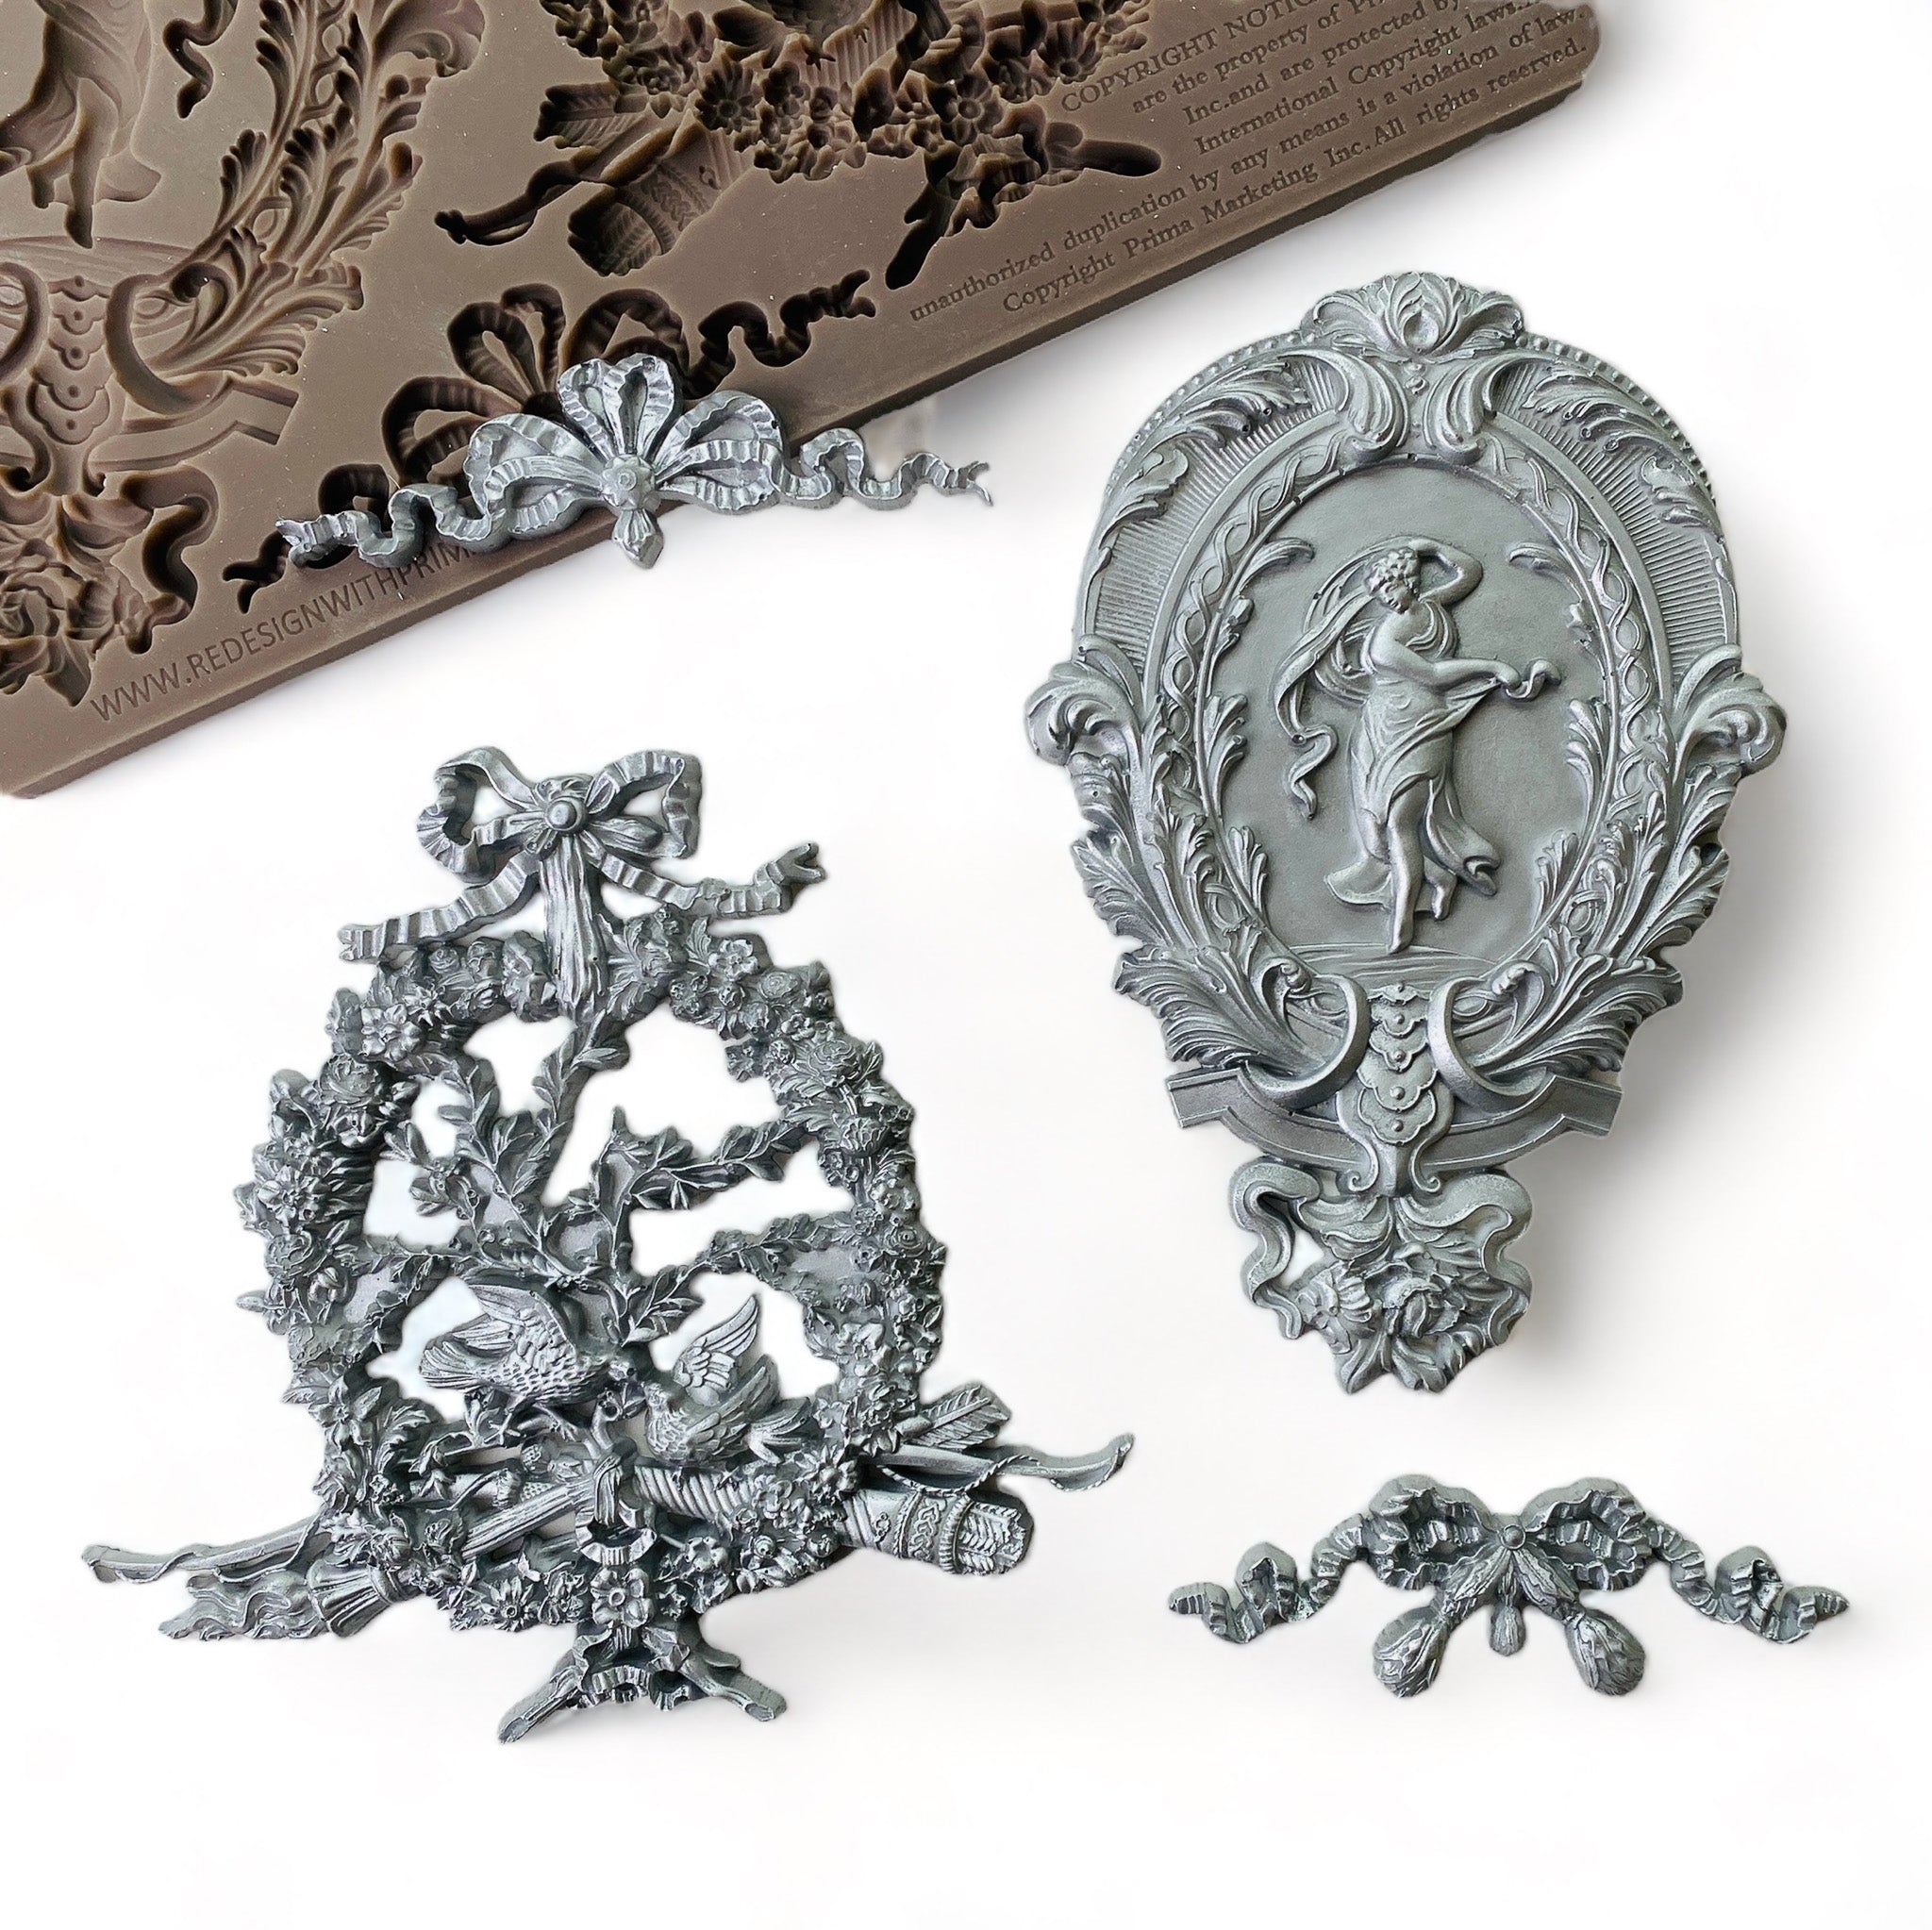 A brown silicone mold and its silver colored castings that feature 2 bows, an ornate oval medallion and an ornate wreath are against a white background.